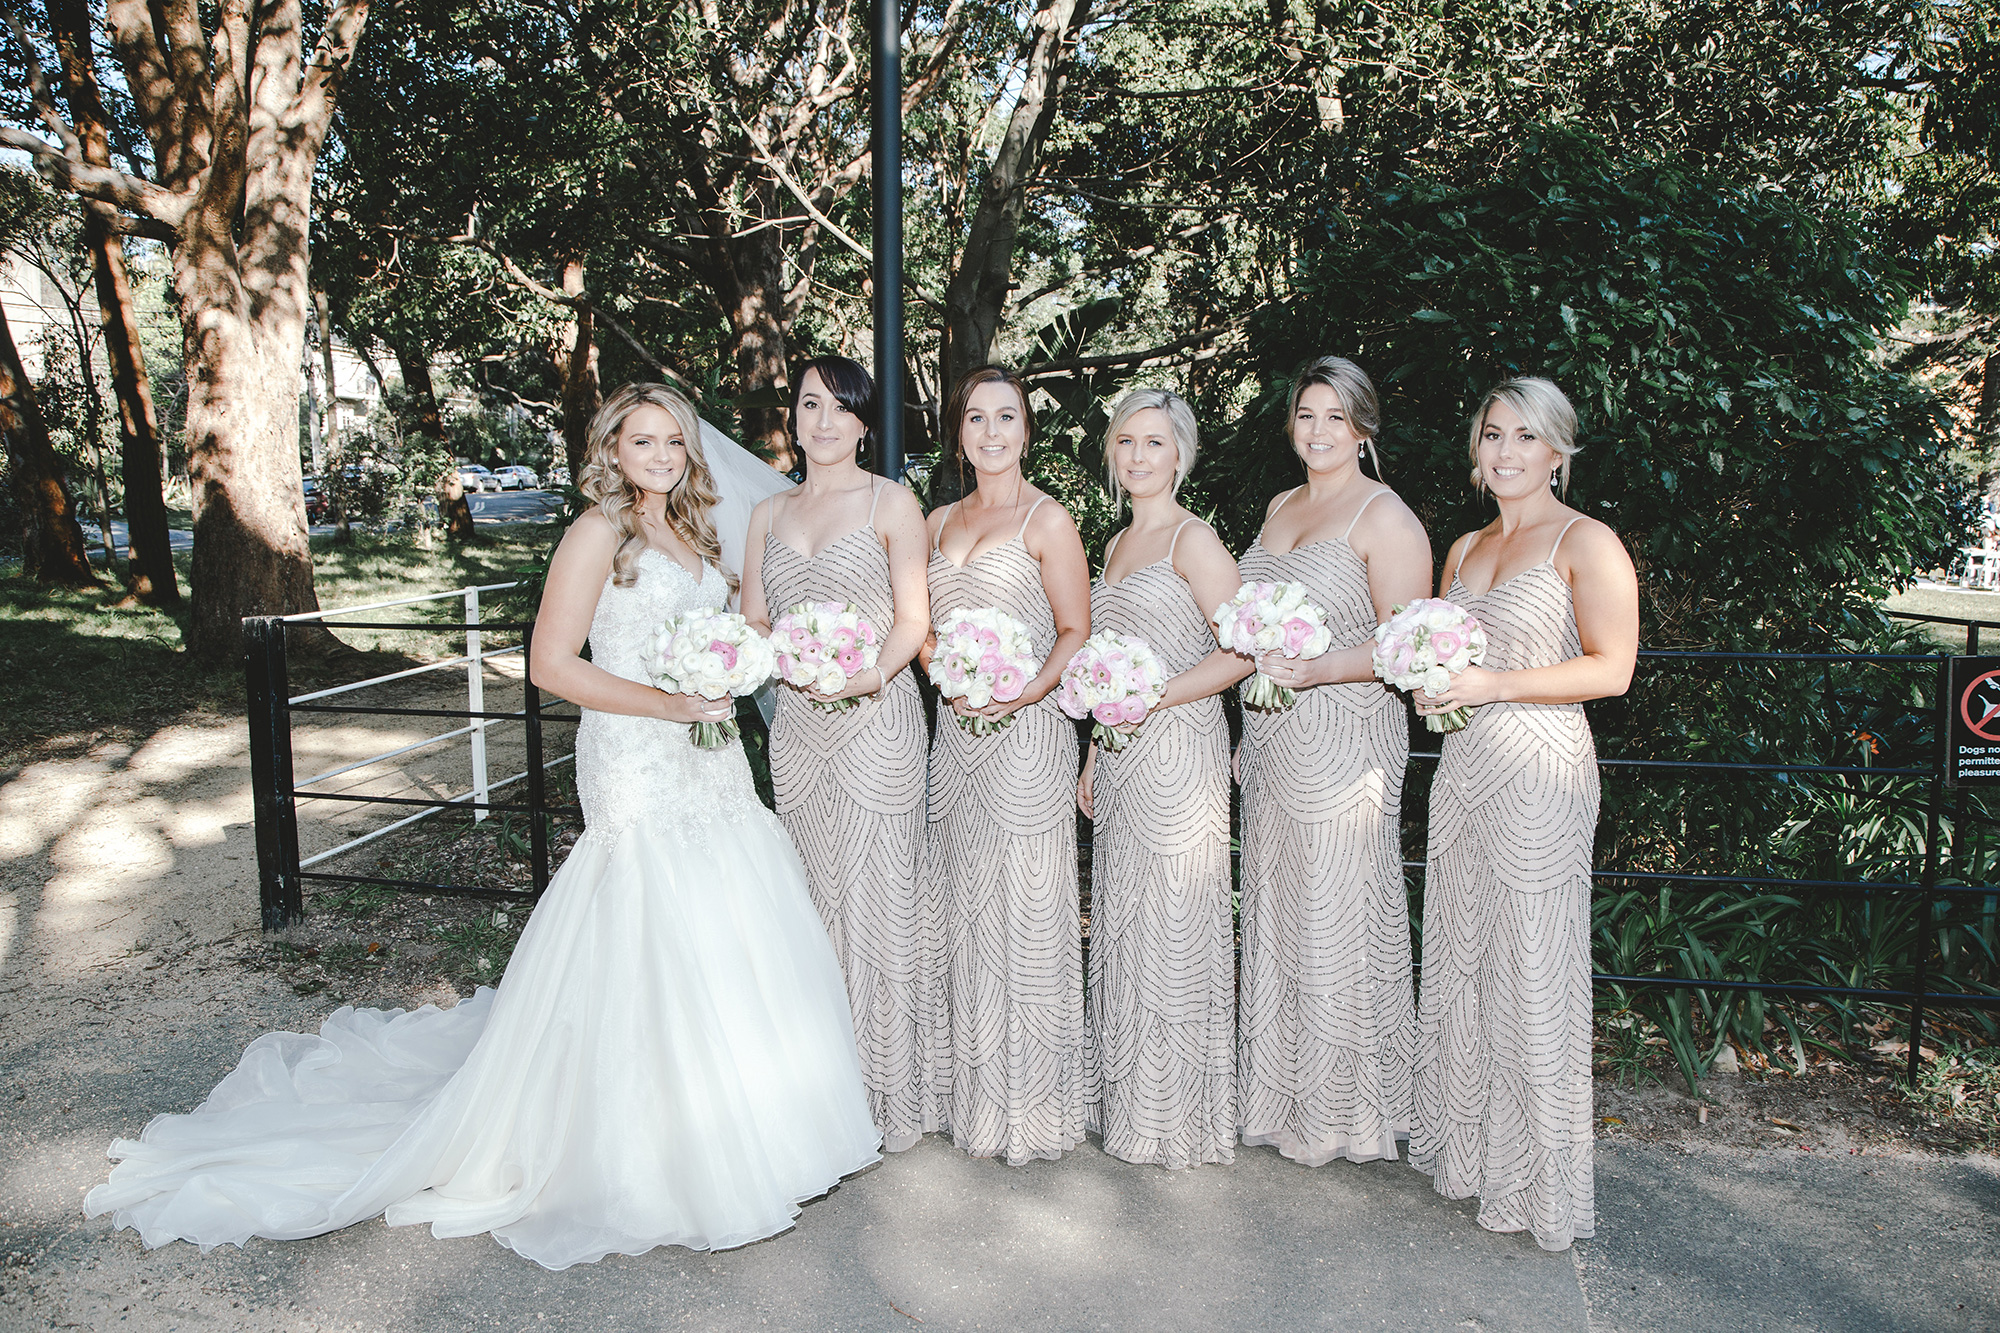 Camille_James_Rustic-Glam-Wedding_Pure-Image-Photography_033